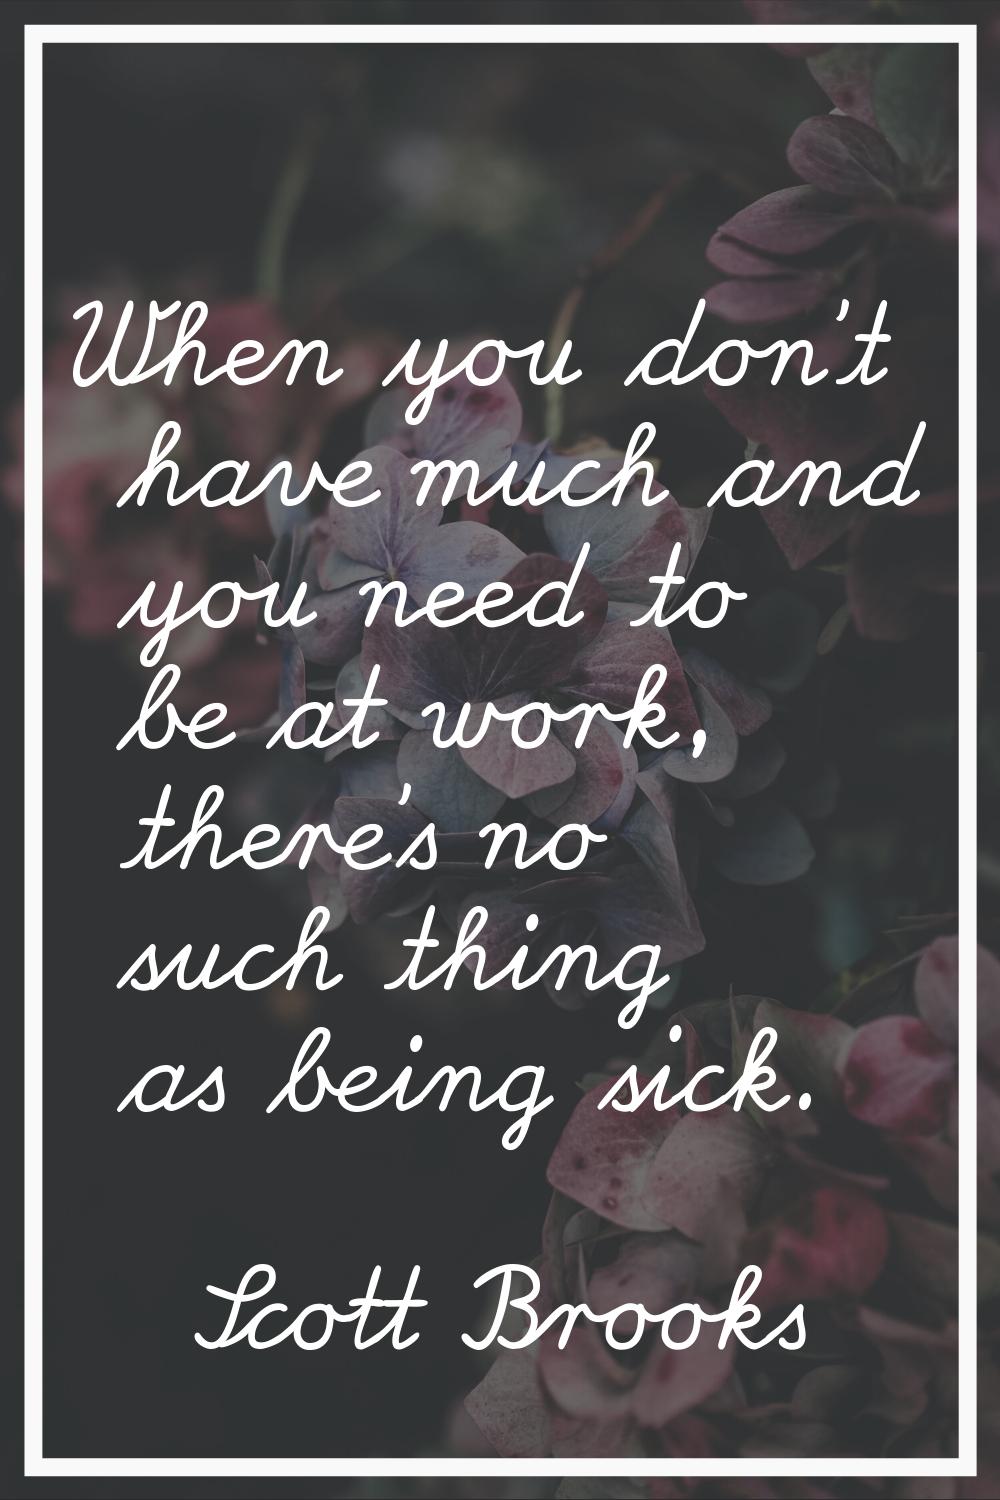 When you don't have much and you need to be at work, there's no such thing as being sick.